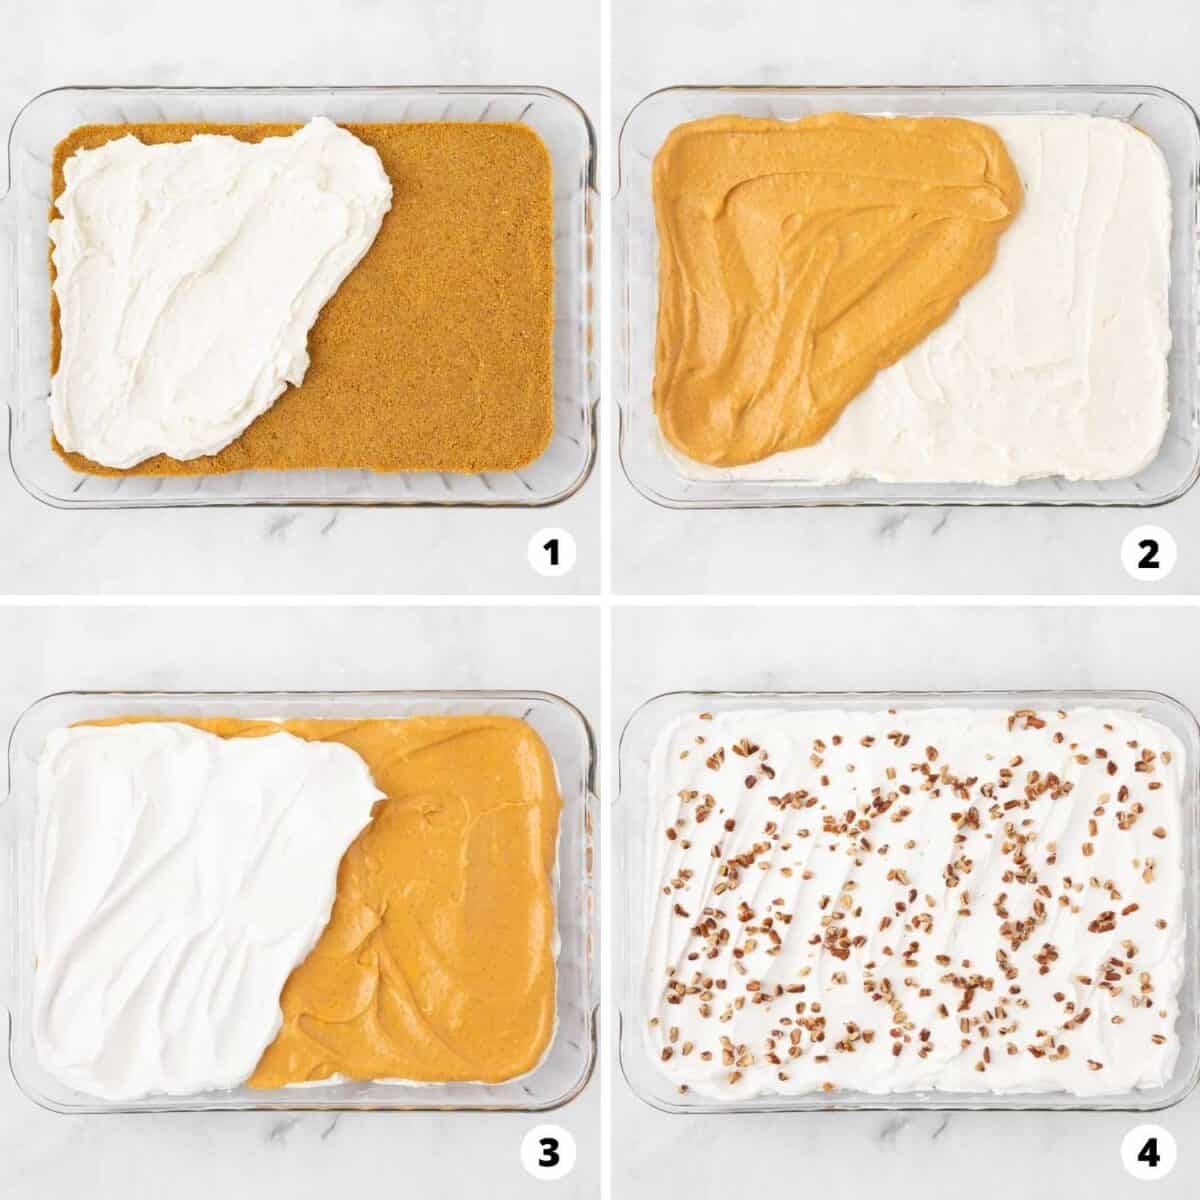 The process of how to make a pumpkin lasagna in a 4 step collage.